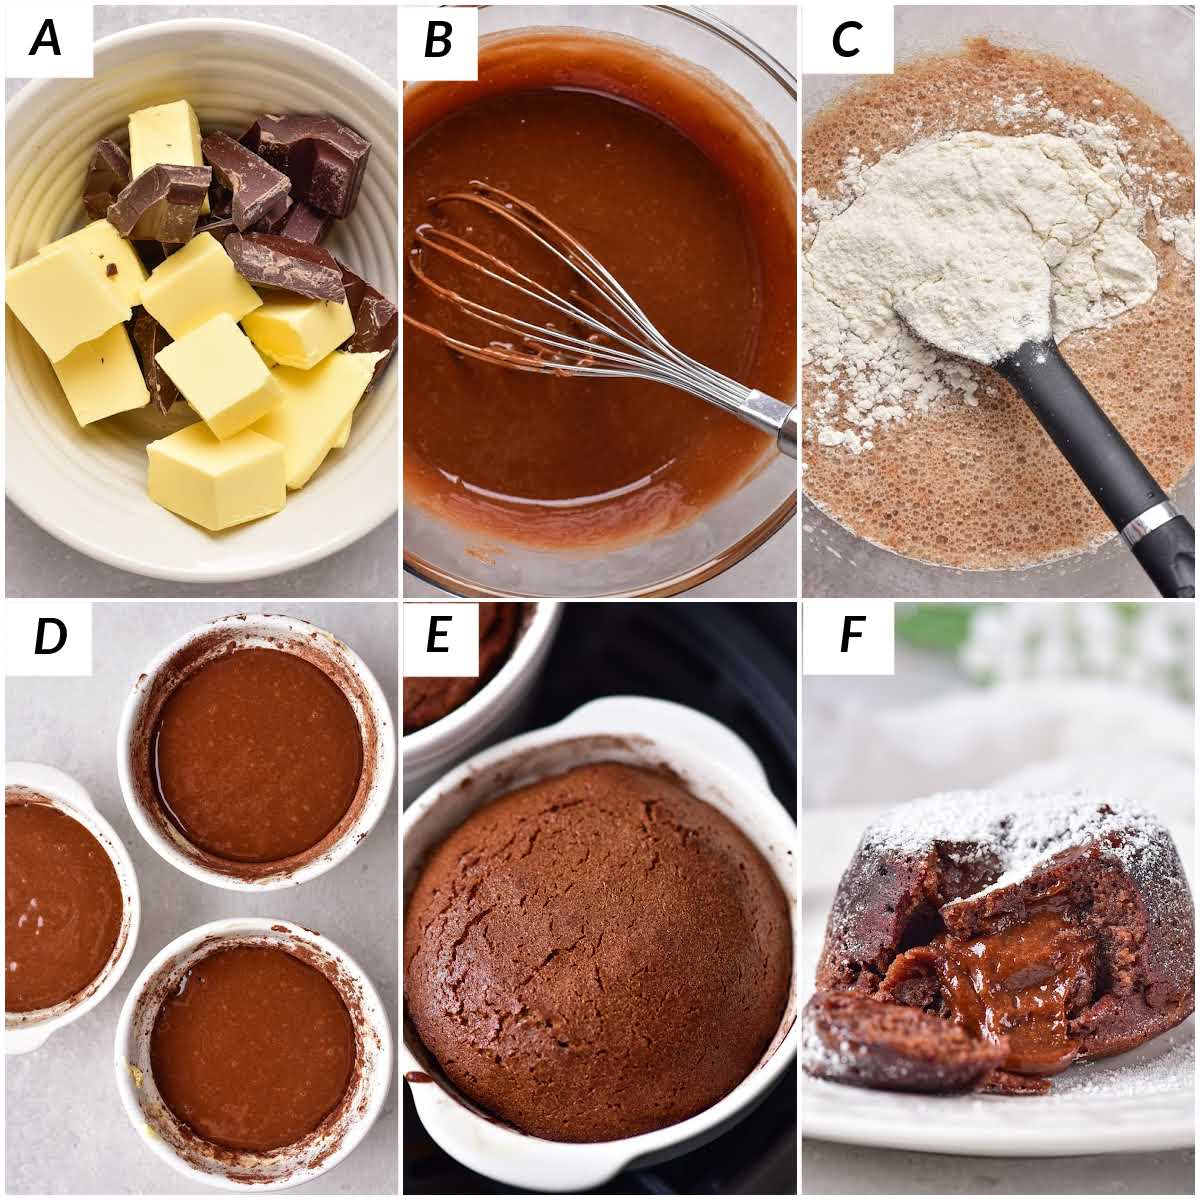 image collage showing the steps for making chocolate lava cake